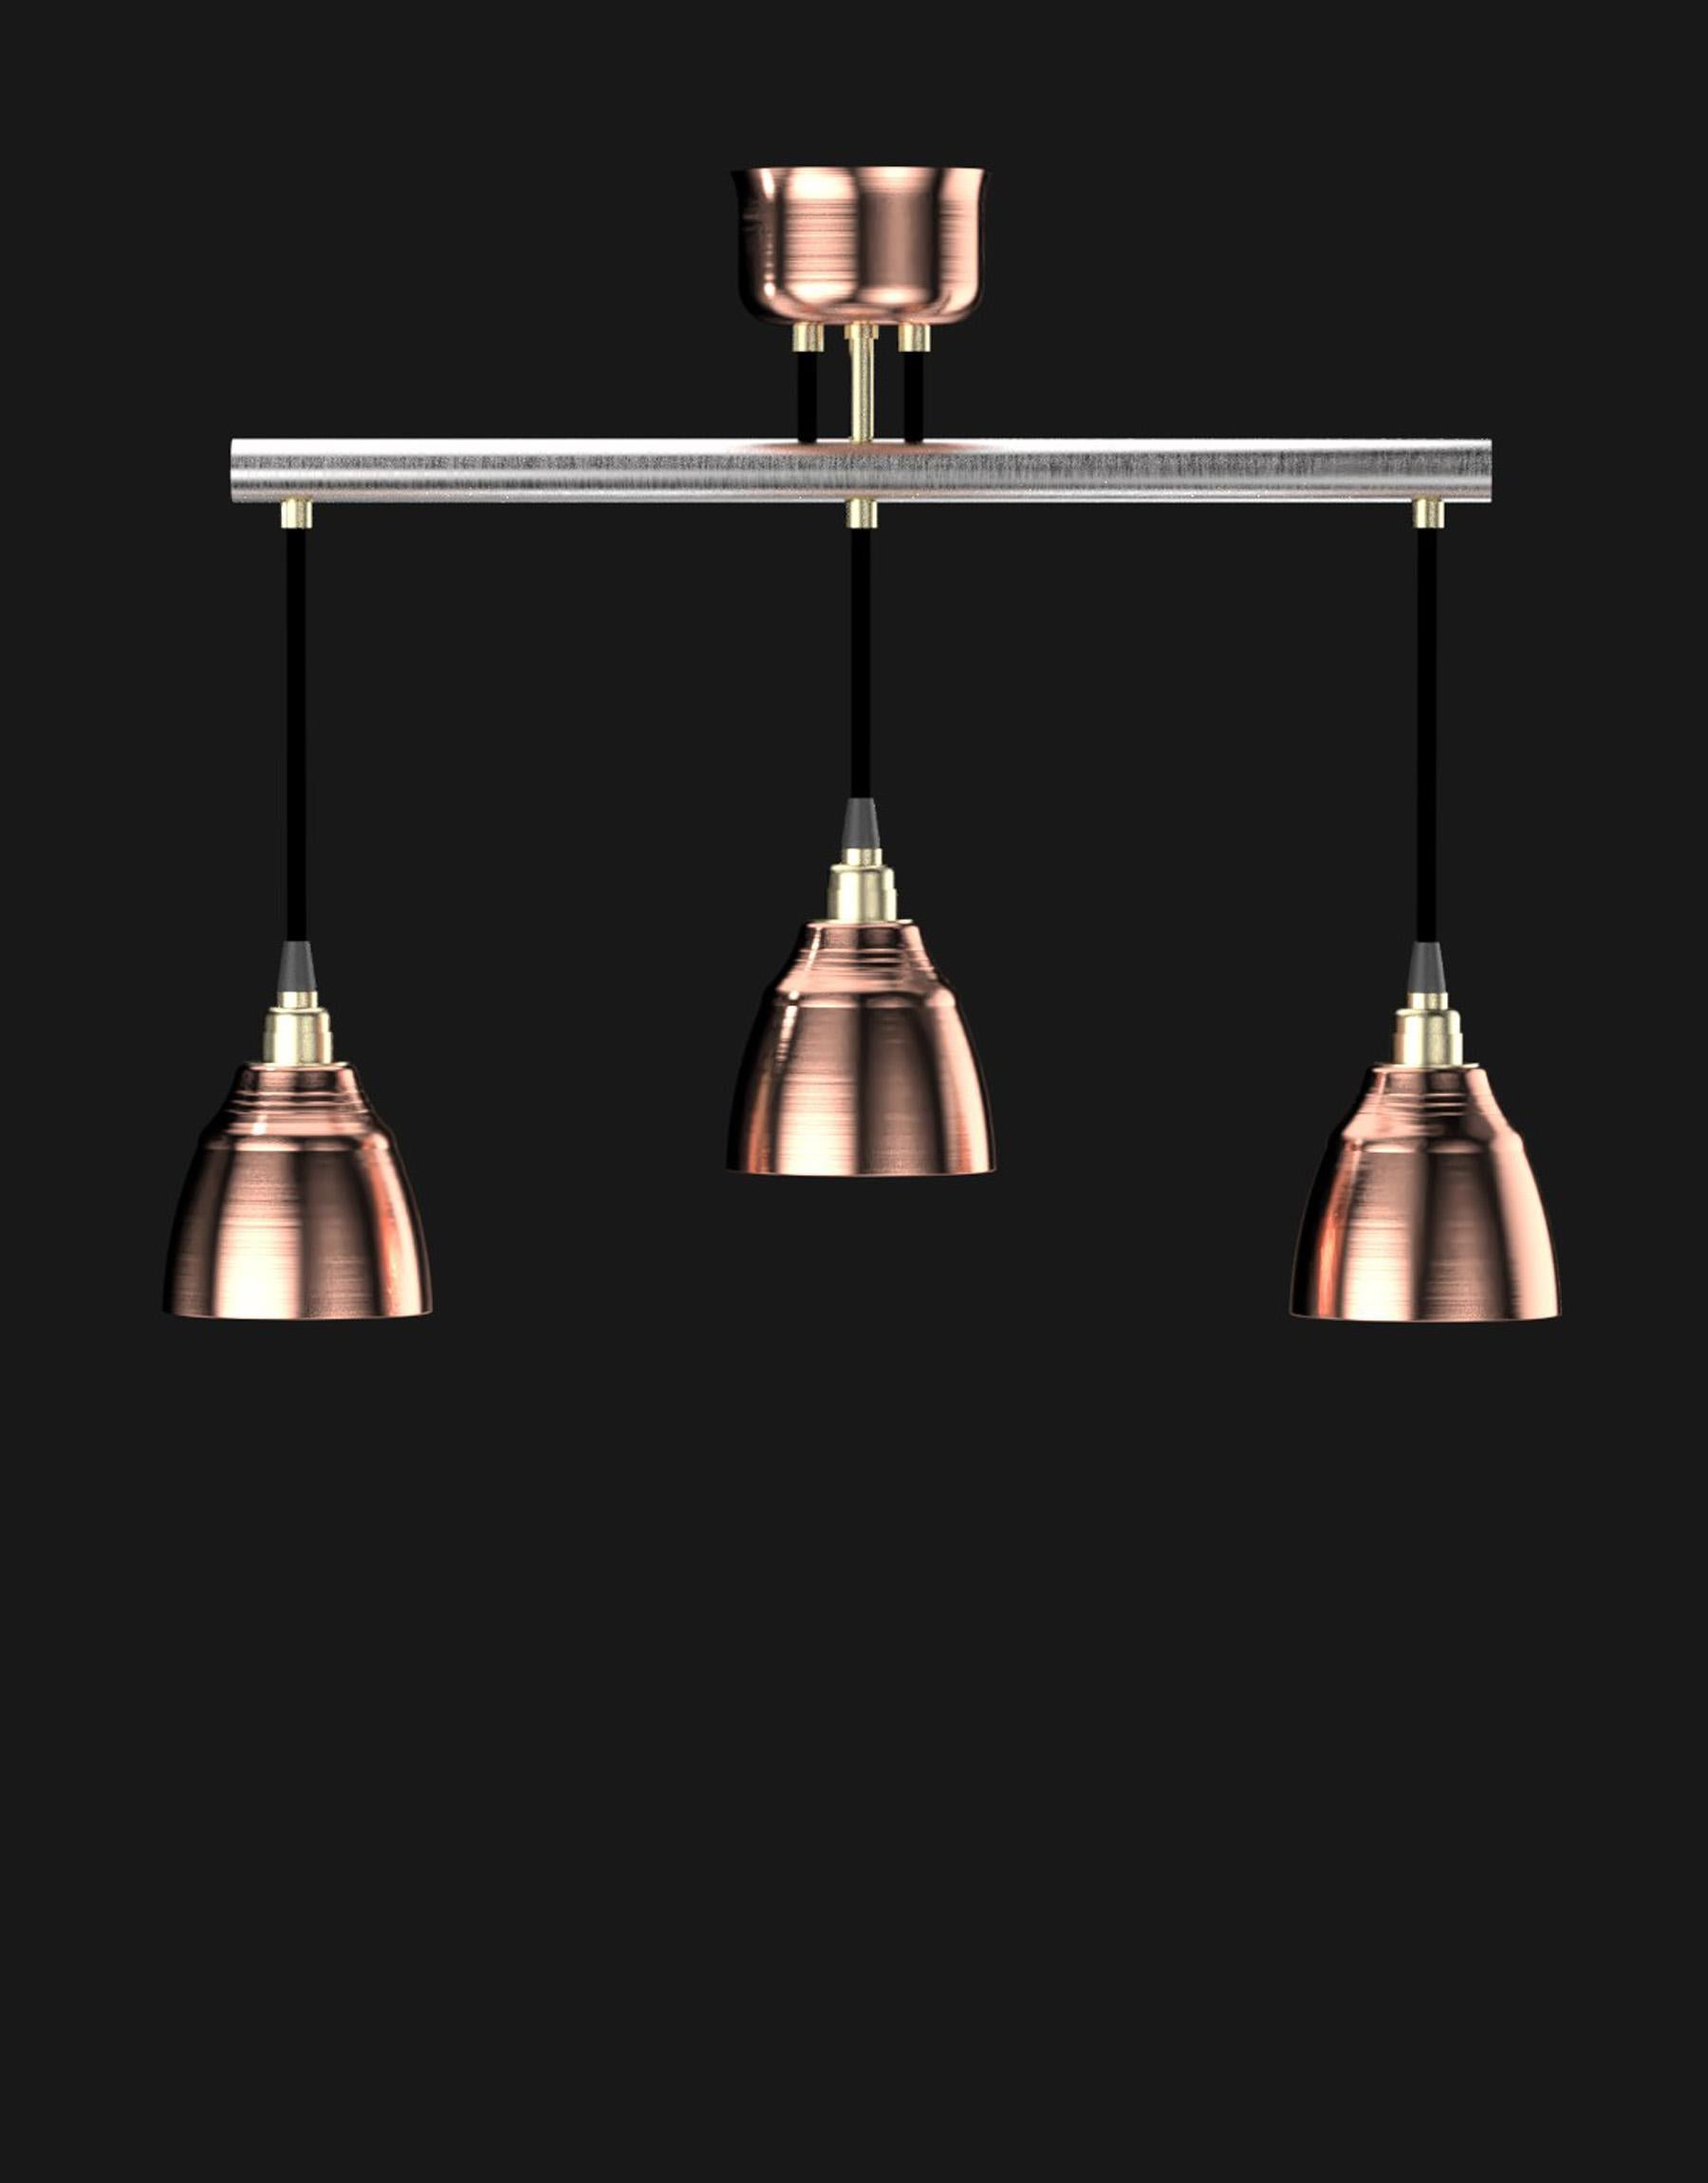 Hand-Crafted Edimate Stainless Steel / Copper Spot V4 Ceiling Light, Handmade in France For Sale